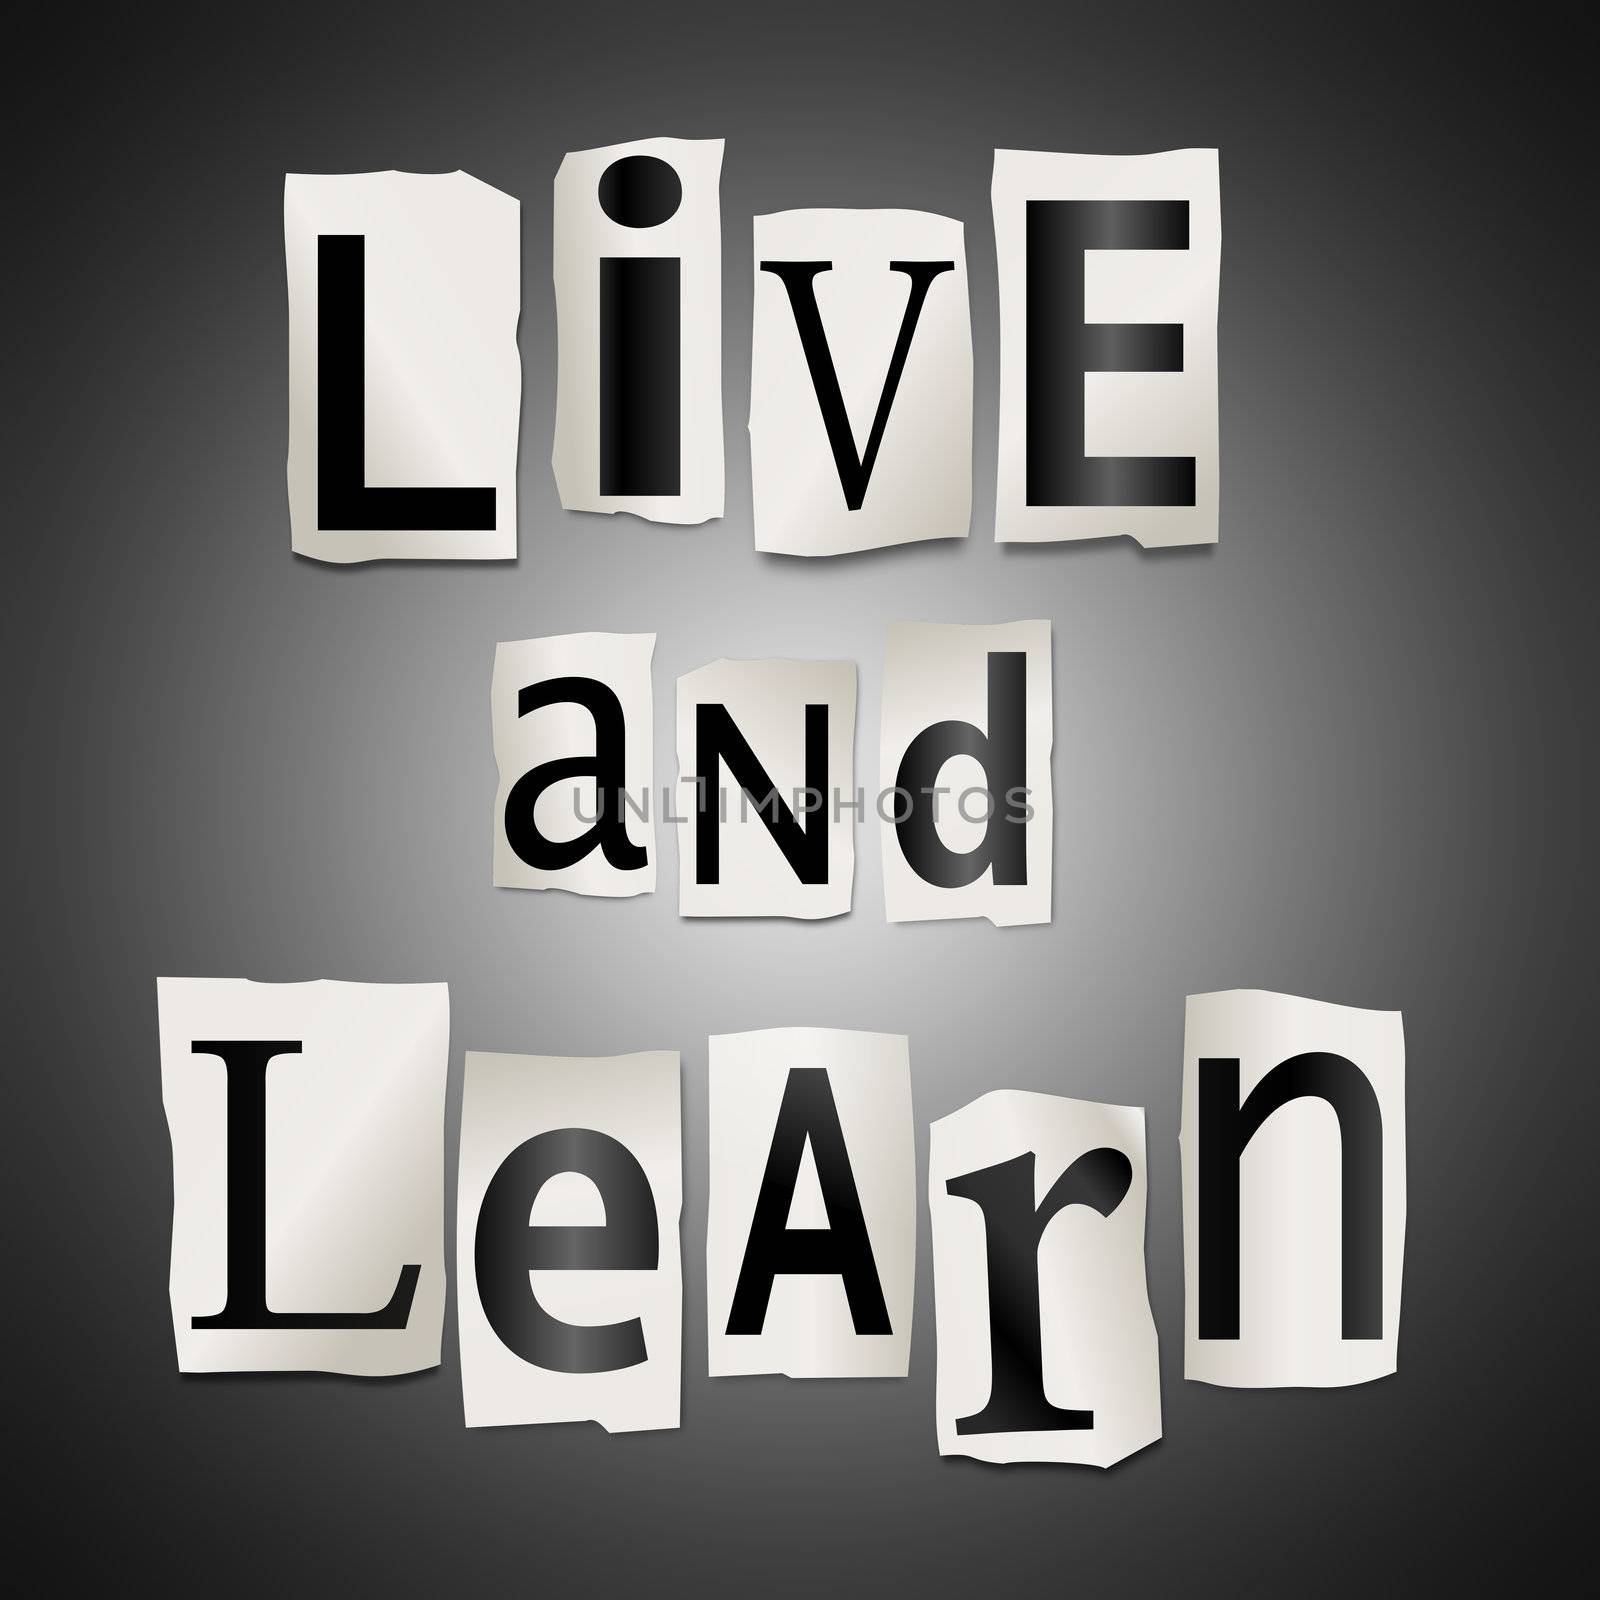 Illustration depicting cut out letters arranged to form the words live and learn.